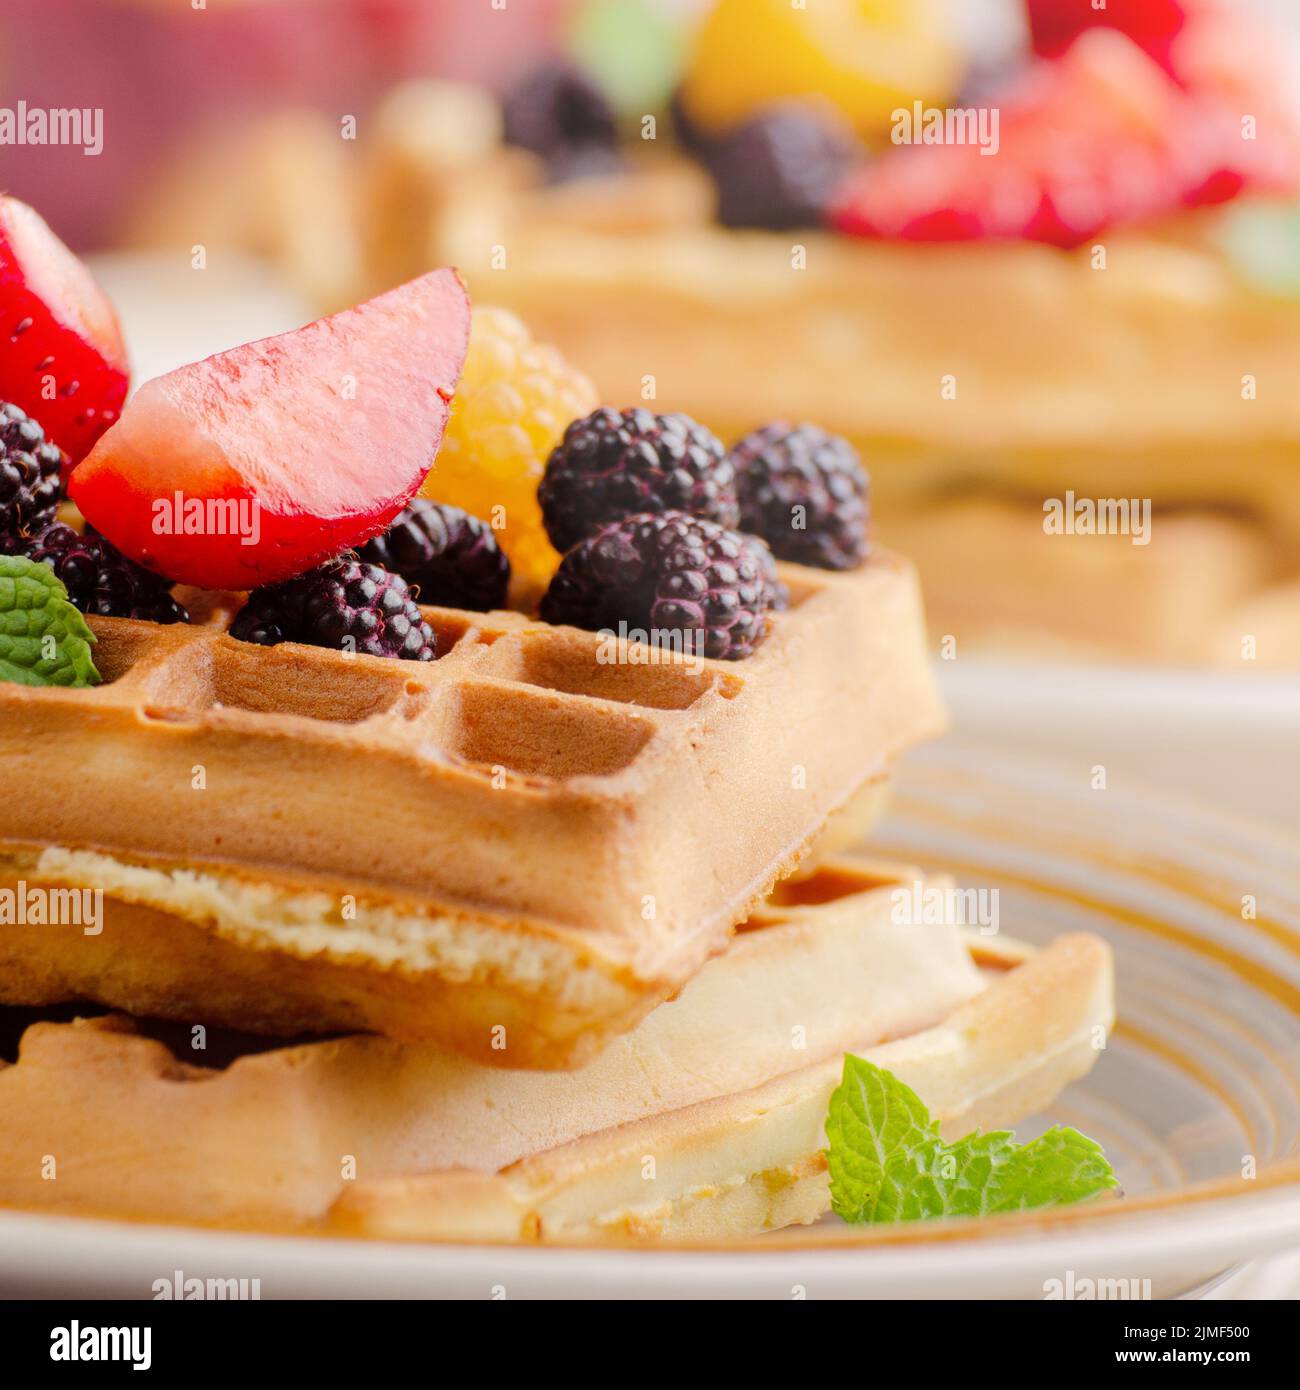 CLoseup view at belgian waffles served with strawberries and blackberries on kitchen table Stock Photo